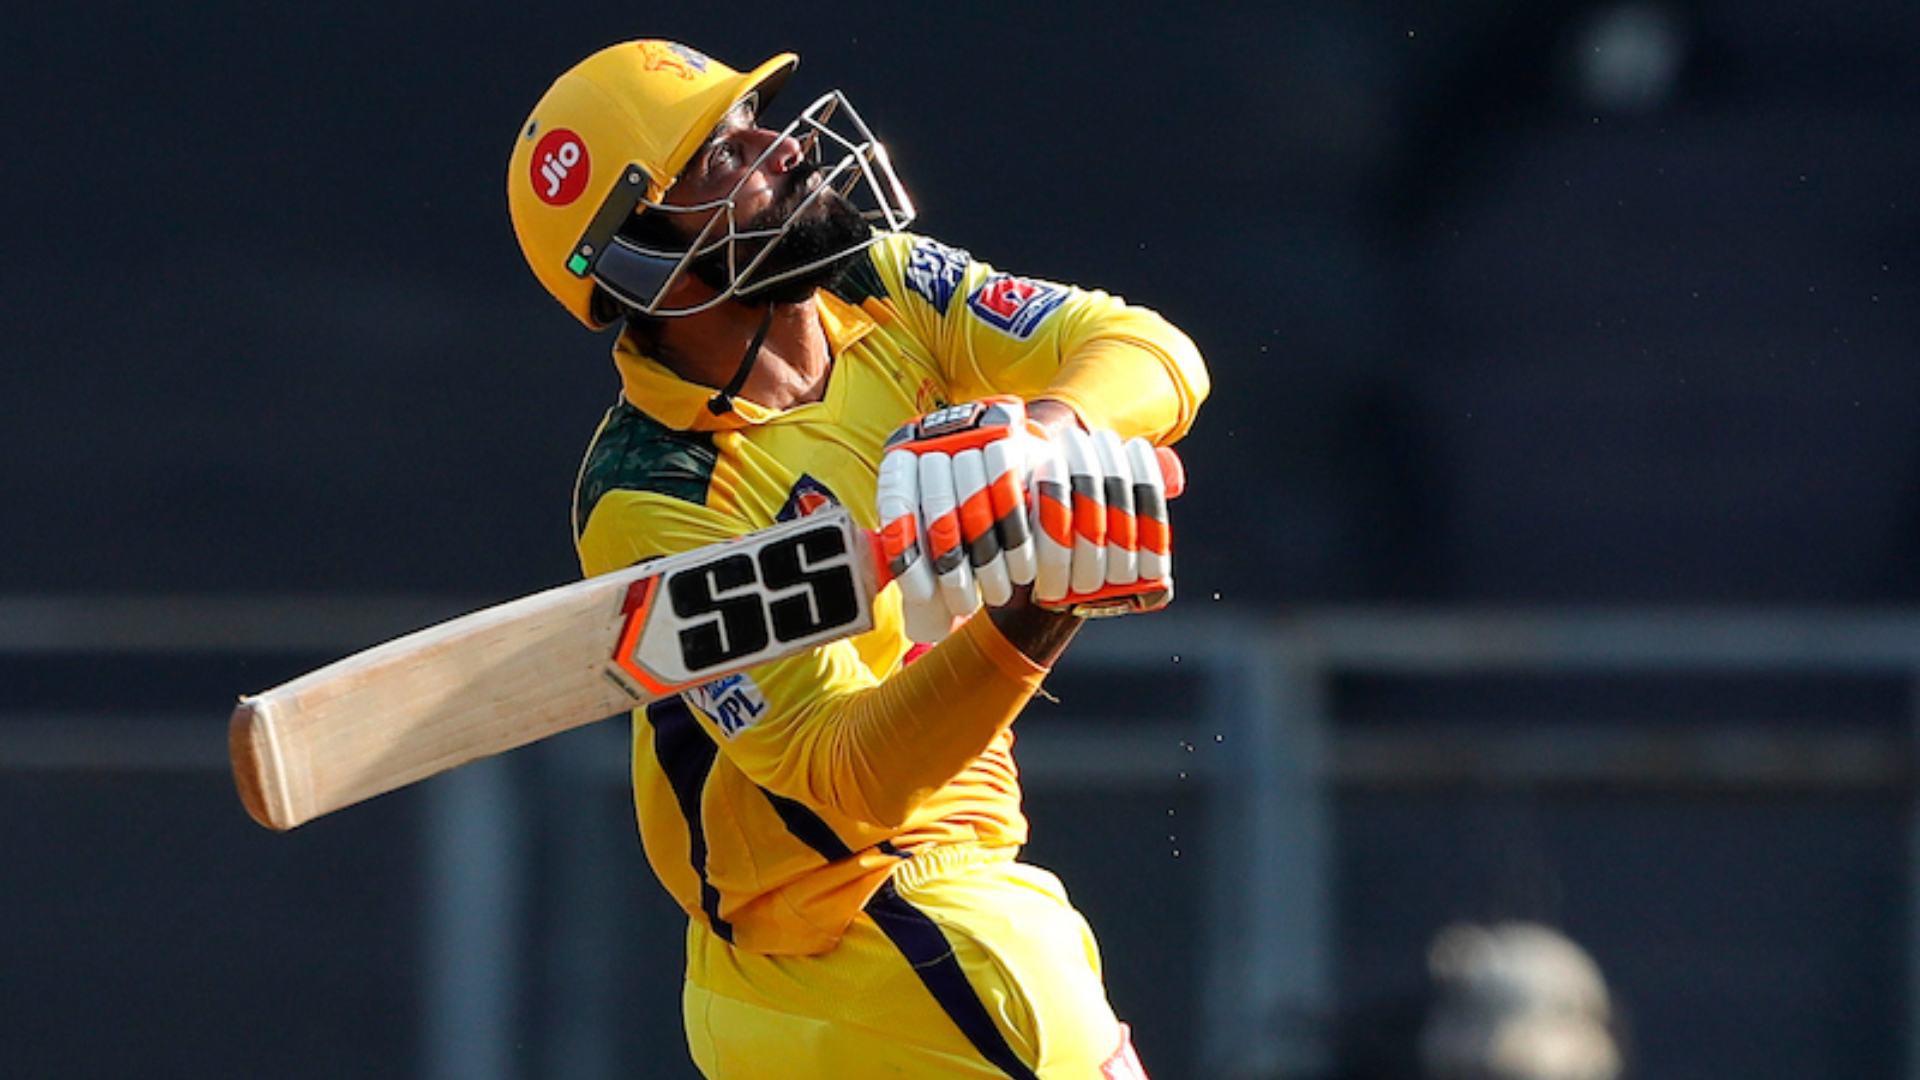 Ravindra Jadeja's knock made all the difference for Chennai Super Kings as they posted 191/4 against Royal Challengers Bangalore.